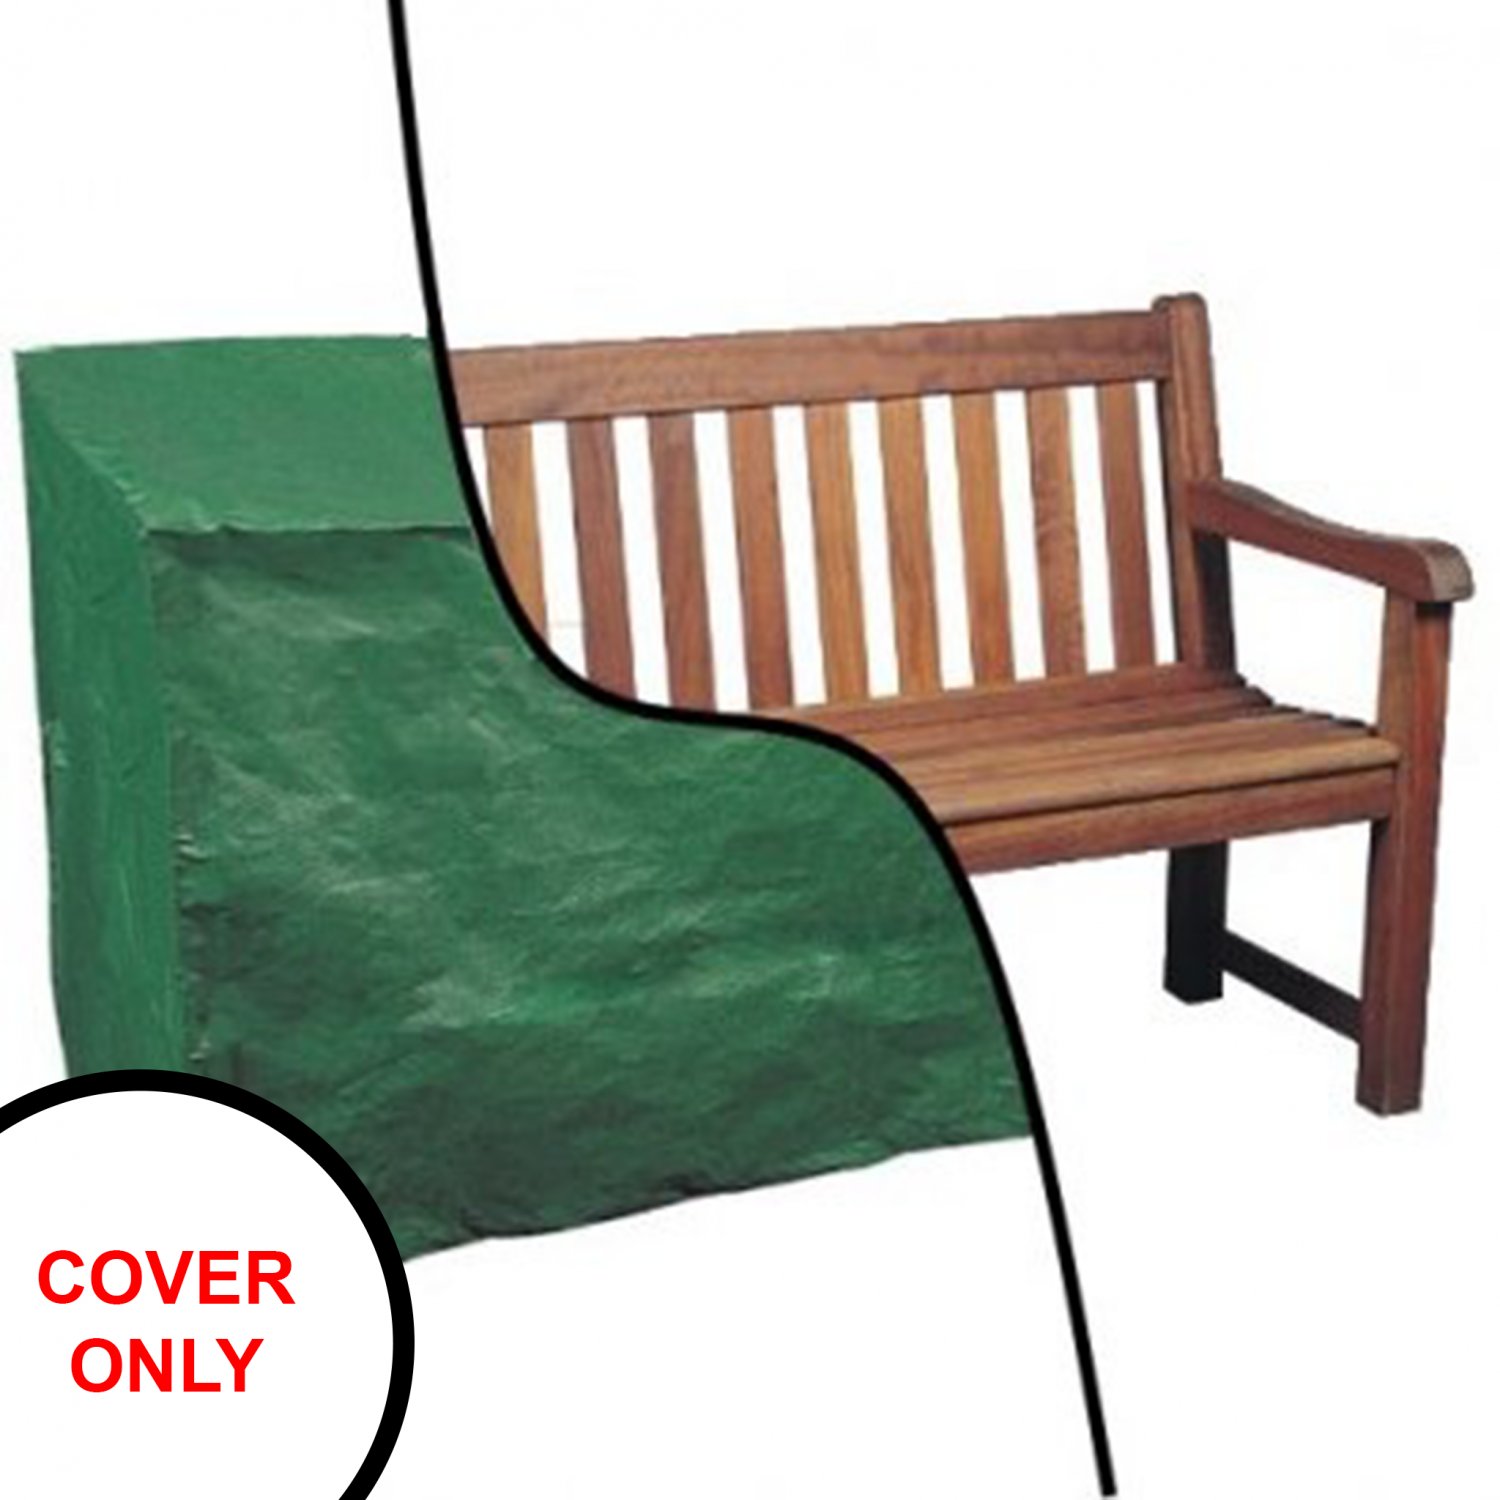 4 Seater Bench Seat Cover, Waterproof Seat Covers For Garden Furniture